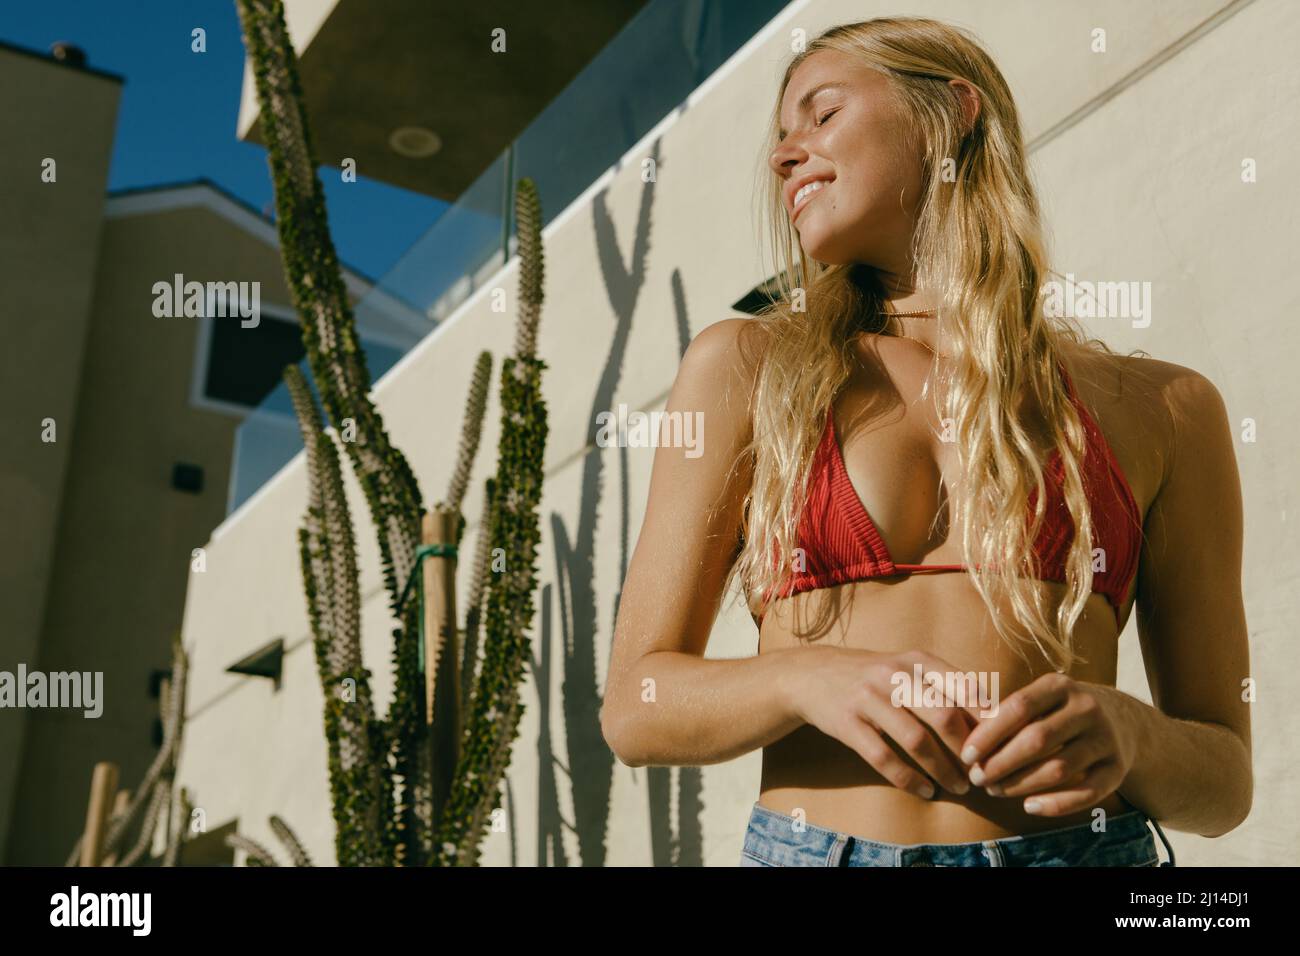 Blond California girl in Los Angeles Stock Photo